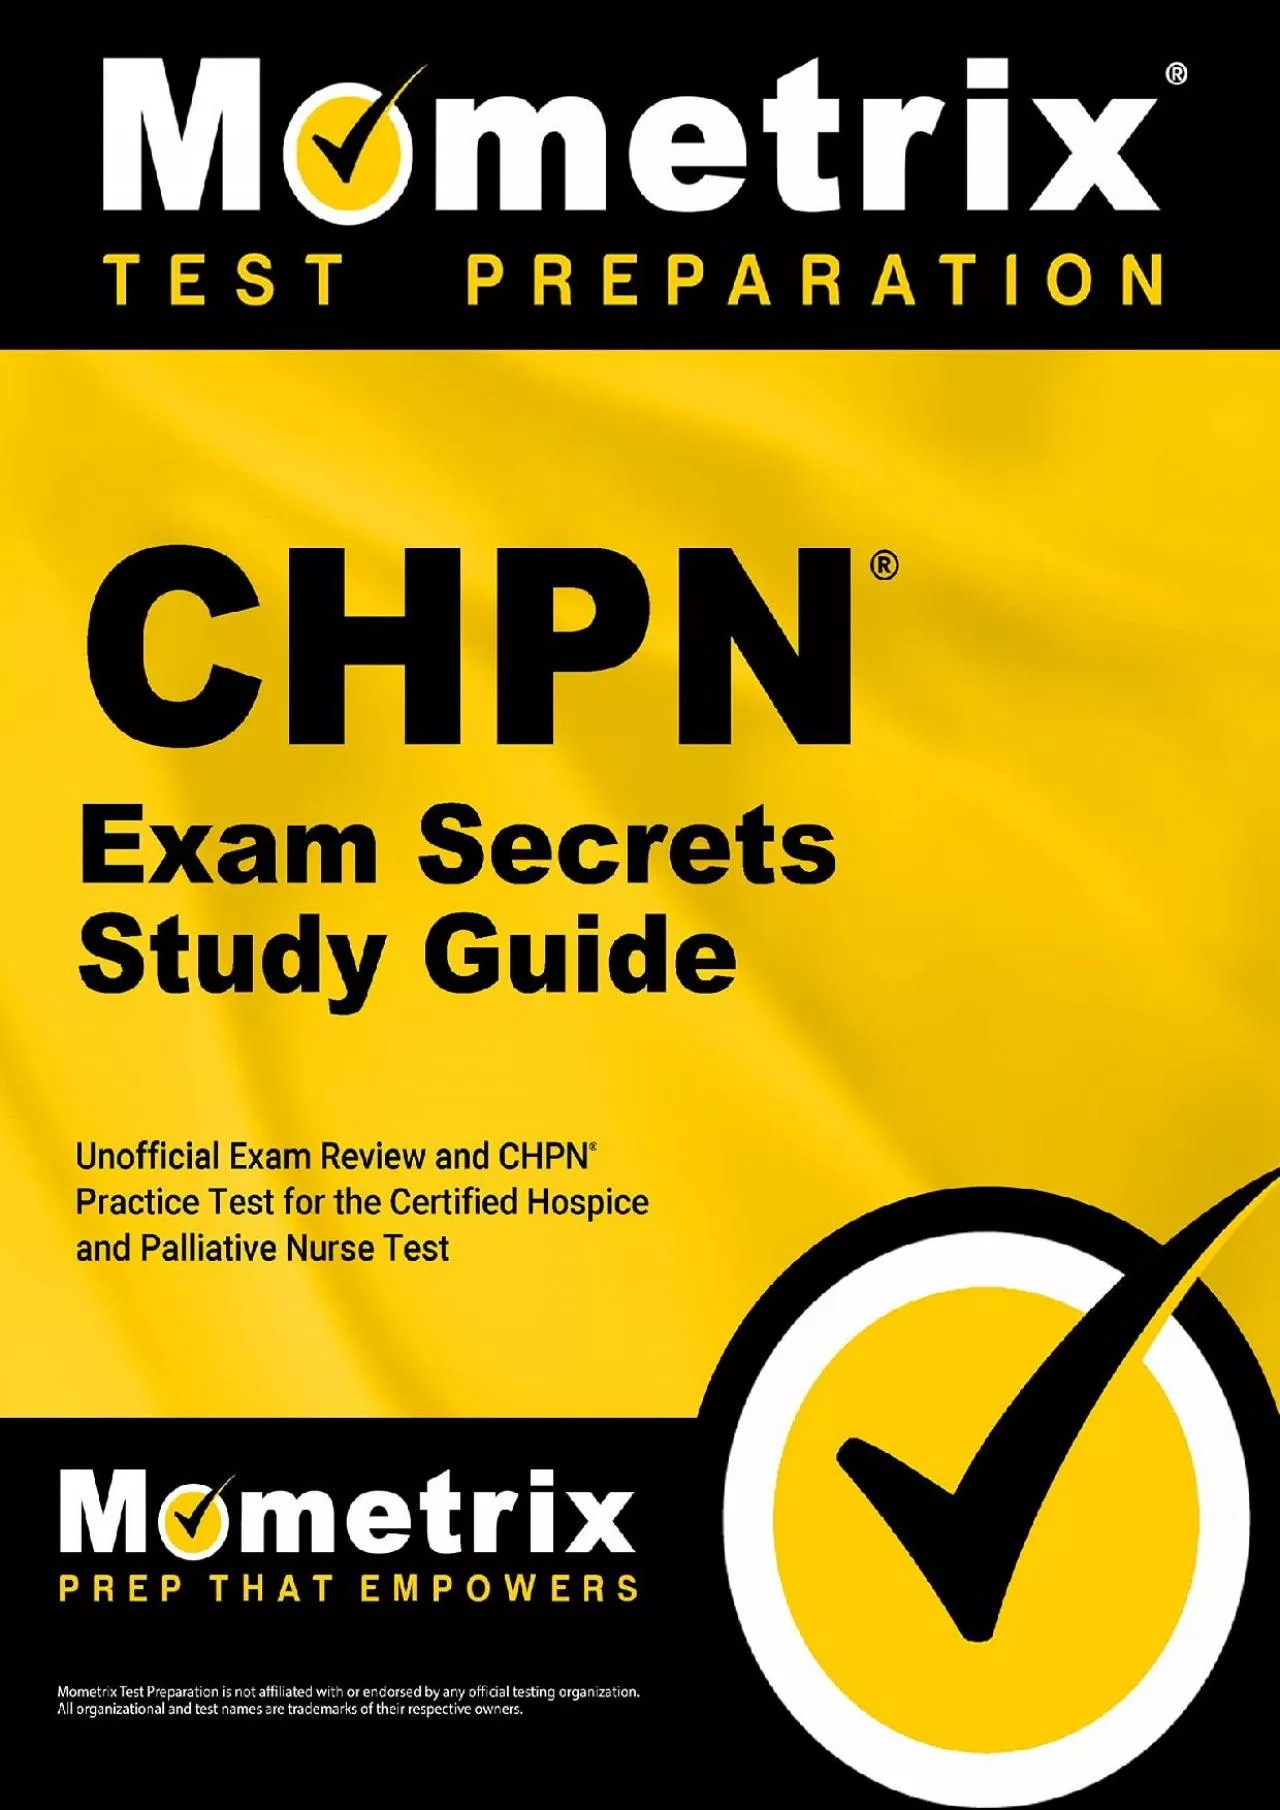 [READ] CHPN Exam Secrets Study Guide - Unofficial Exam Review and CHPN Practice Test for